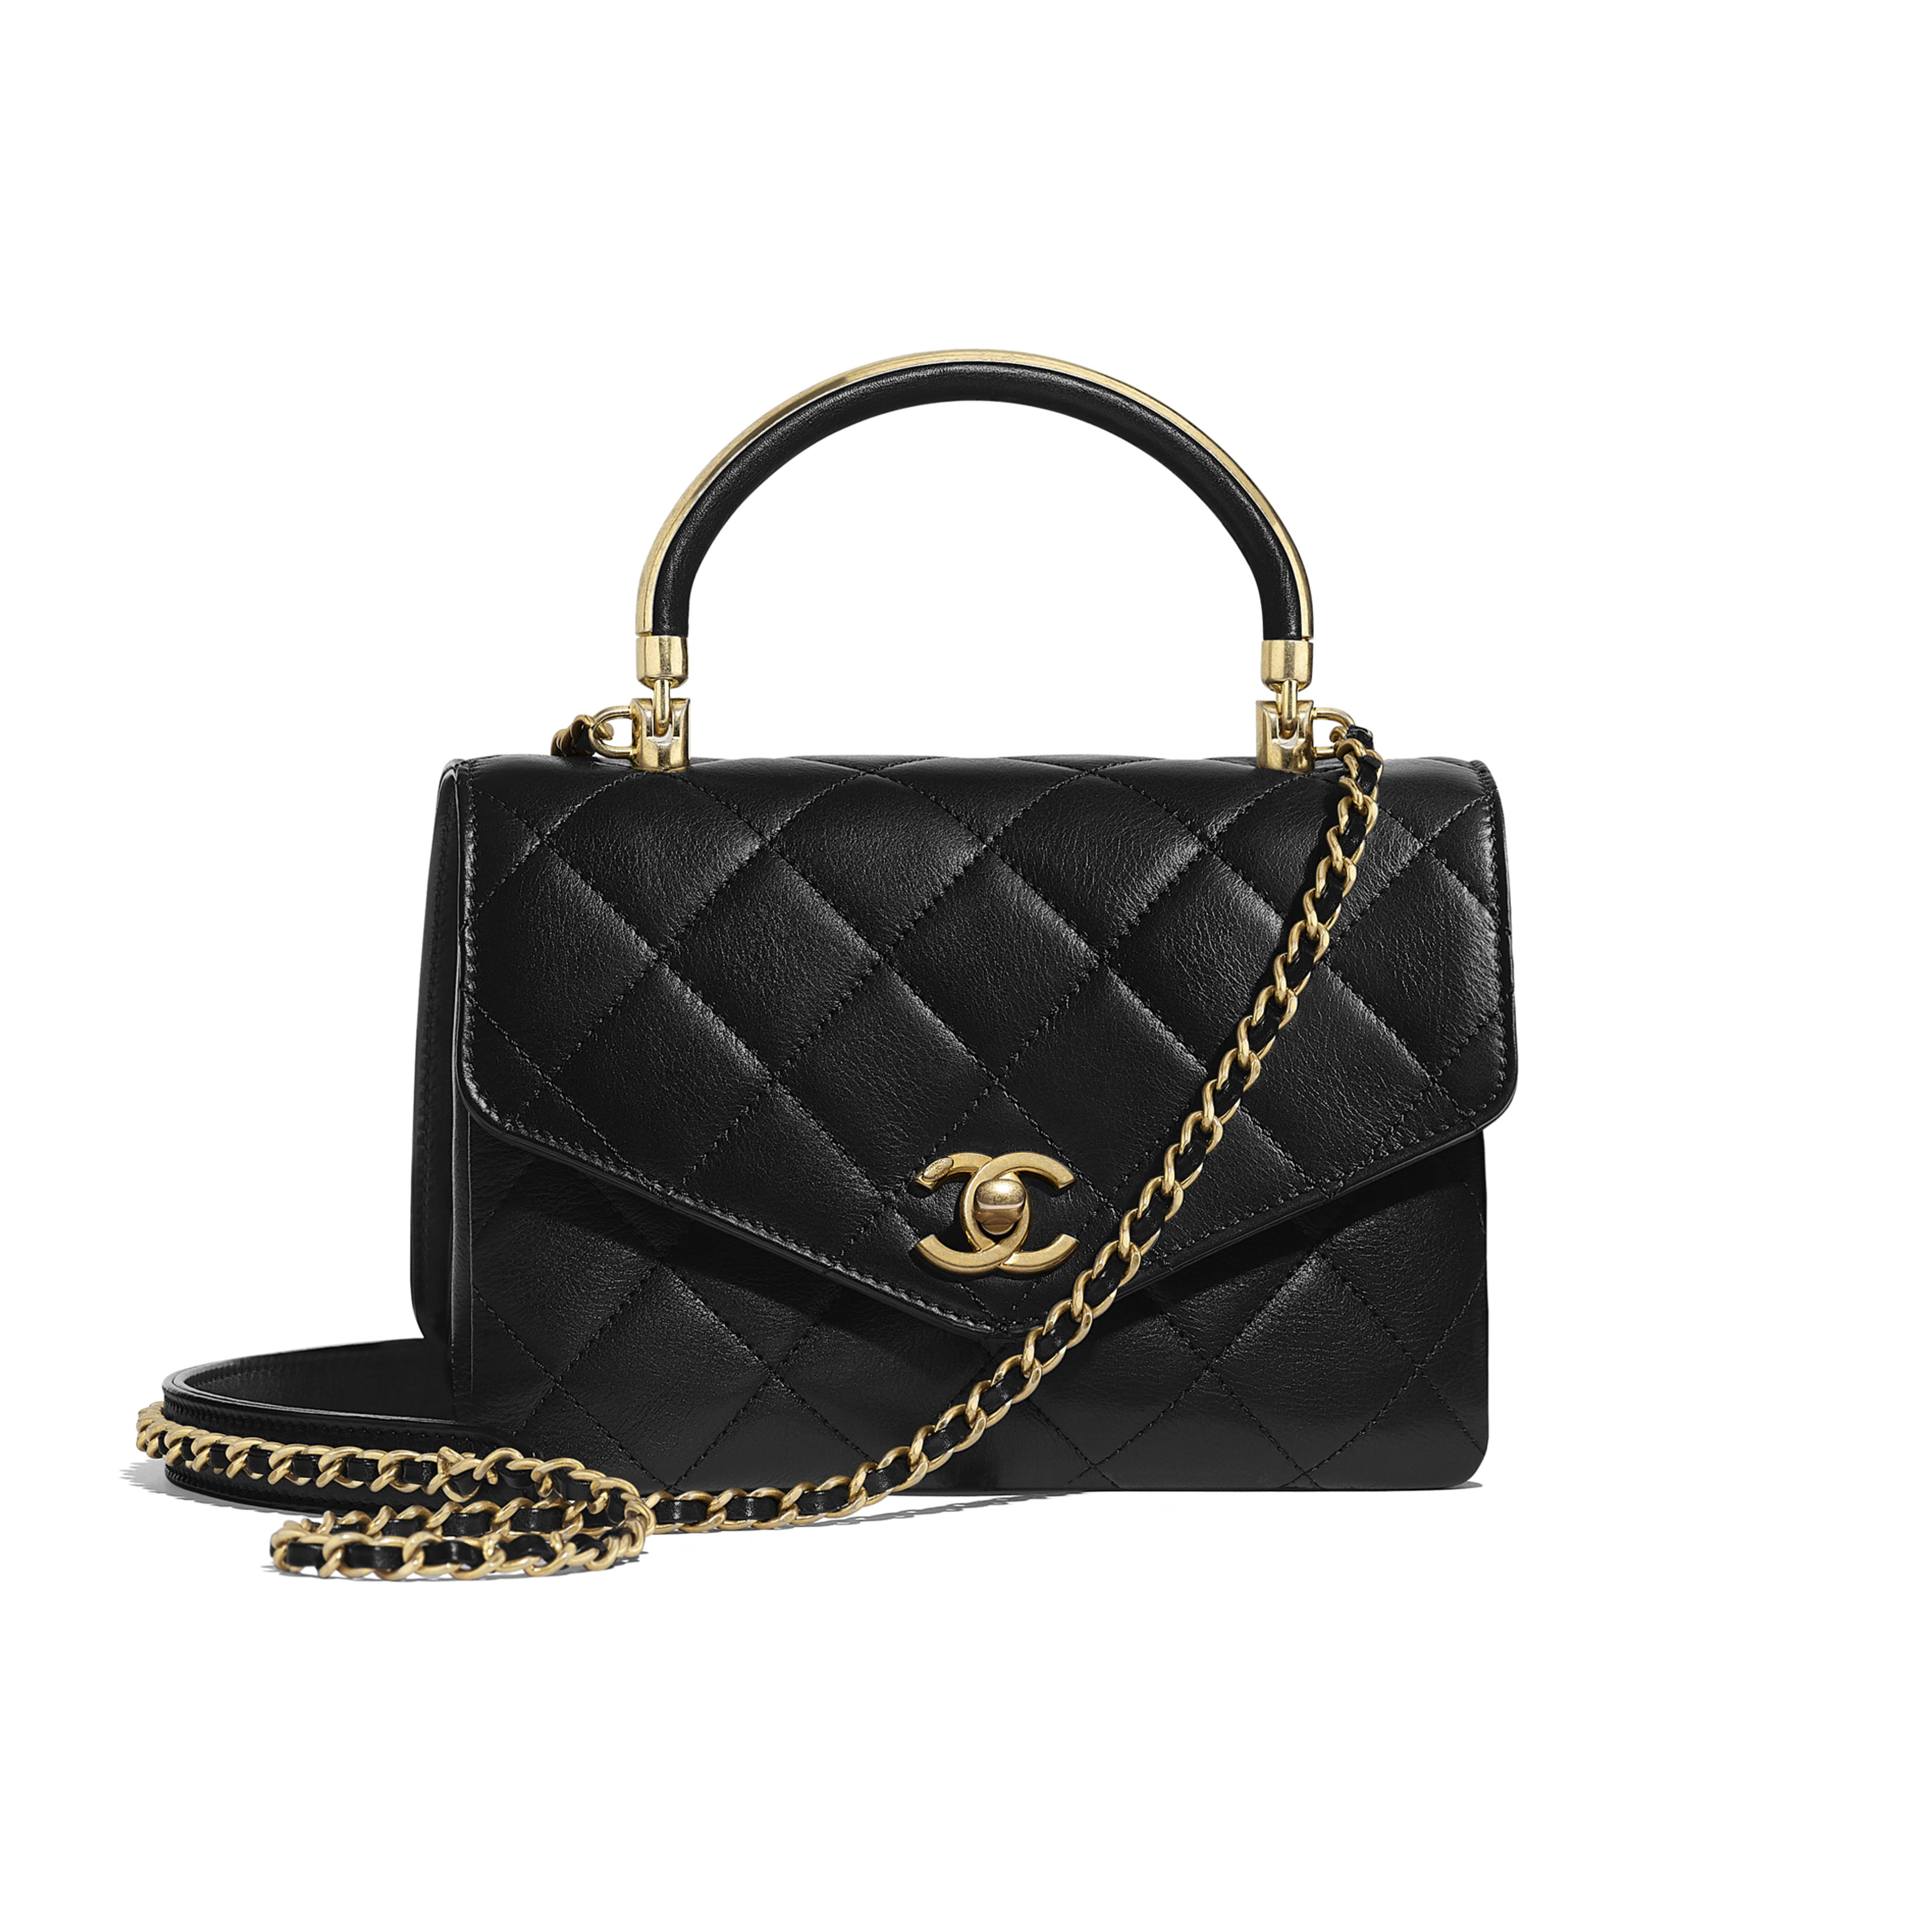 3 Beautiful Chanel Bags For 2019 (Including Prices) – Haya Glamazon